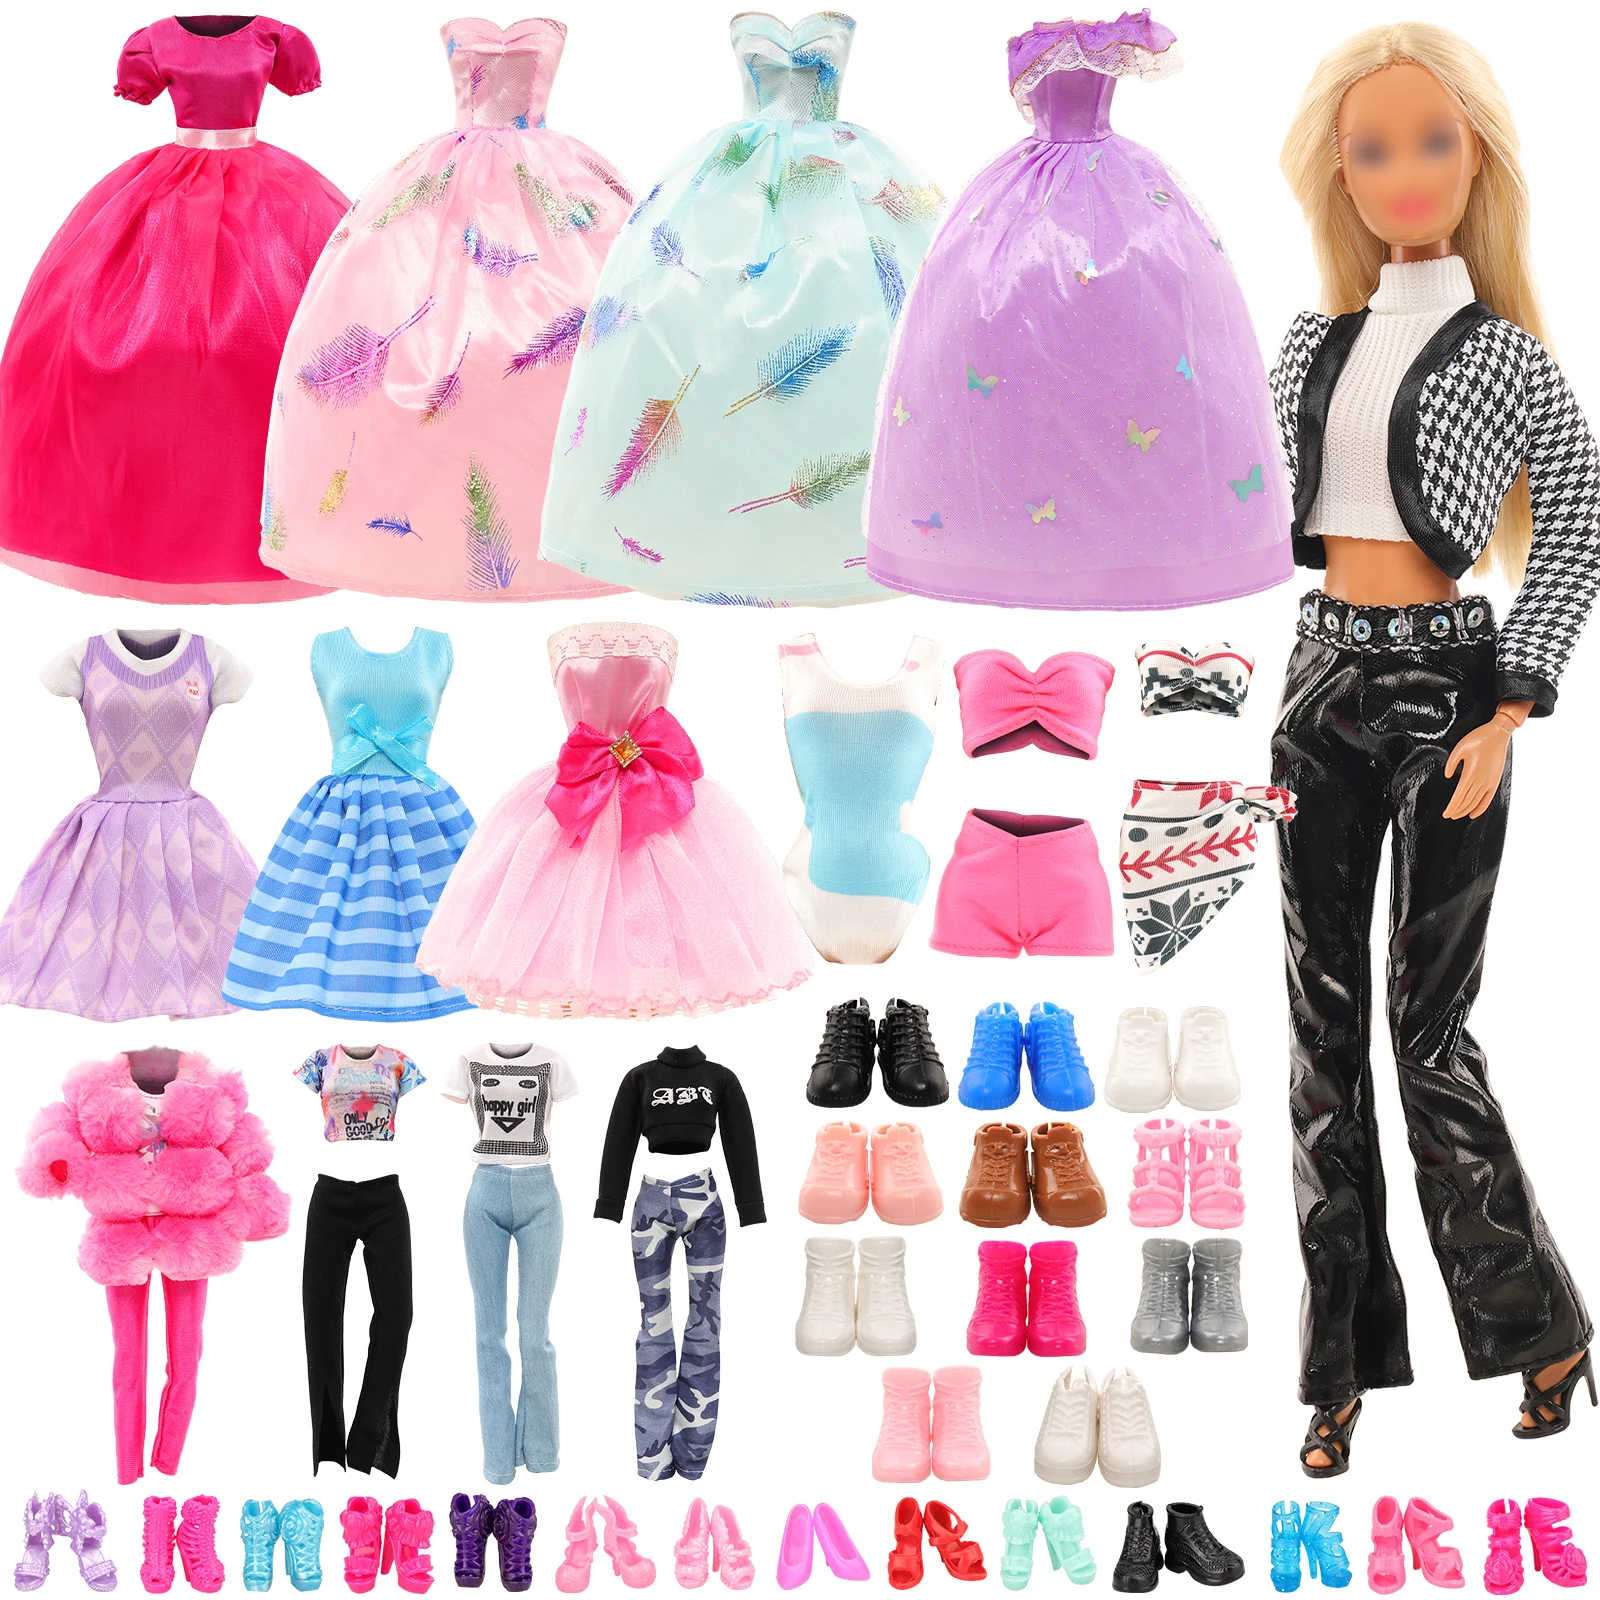 

Barwa 36 Pcs Fashion Doll Clothes and Accessories=6 Dress+3 Set Tops and Pants+3 Swimsuits+15 Shoes Gift for Kids 3 to 8 Years